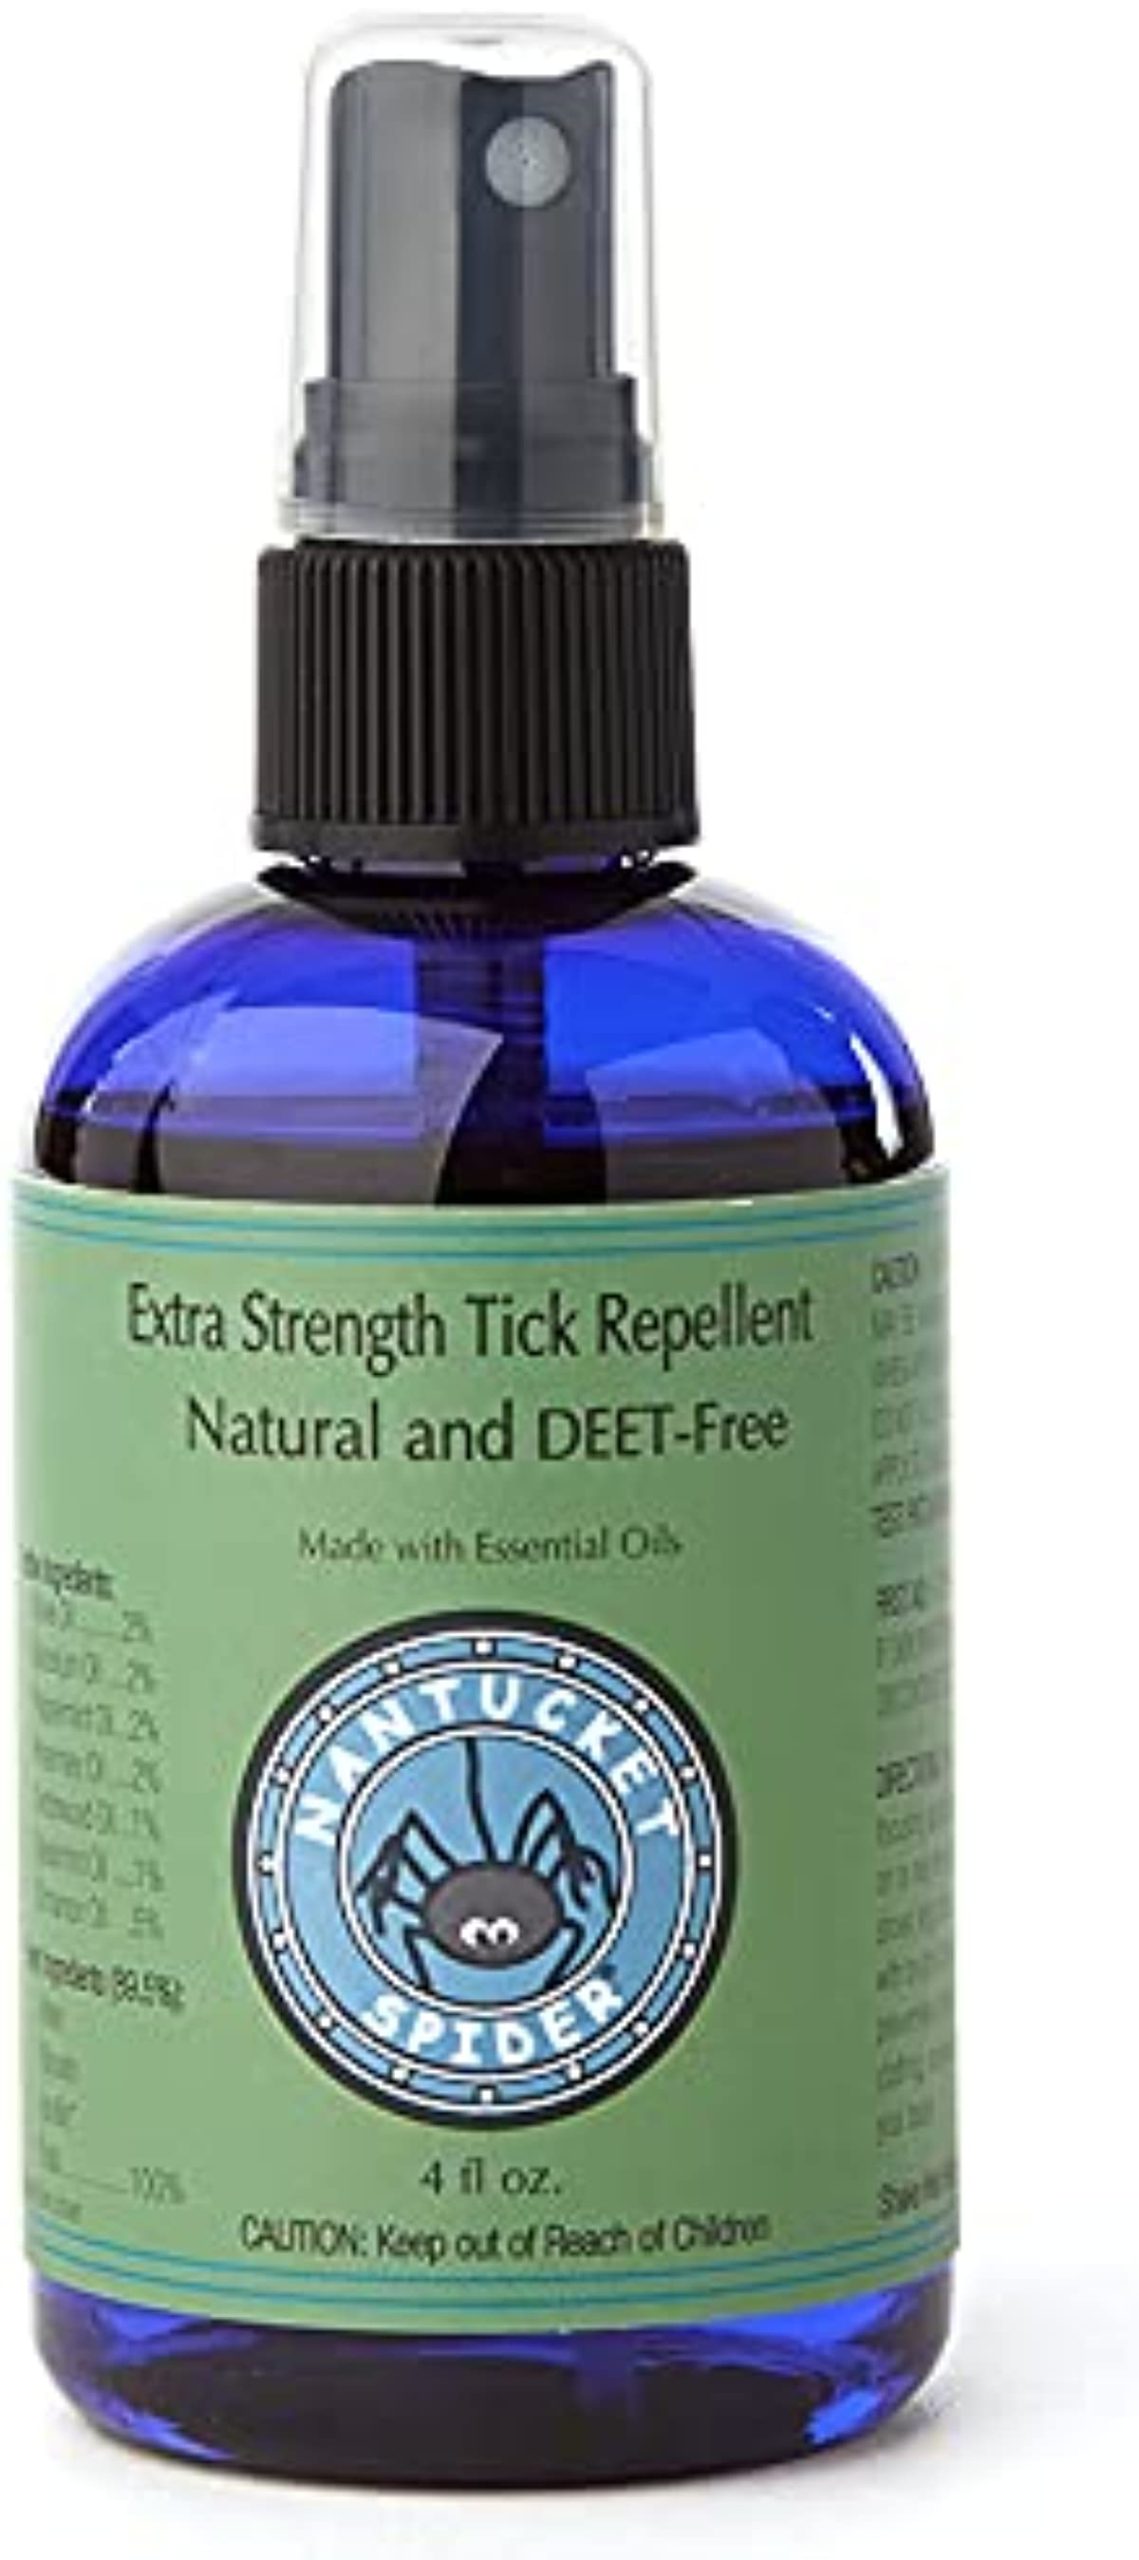 Nantucket Spider Extra Strength Tick Repellent Spray - 4 Ounce Travel Size | Natural Tick Repellent for People | Made in The USA with 100{62cf60b6af9dbea8298943f23643e6f3890df02340872d1f854d7239a35043f6} Organic Essential Oils